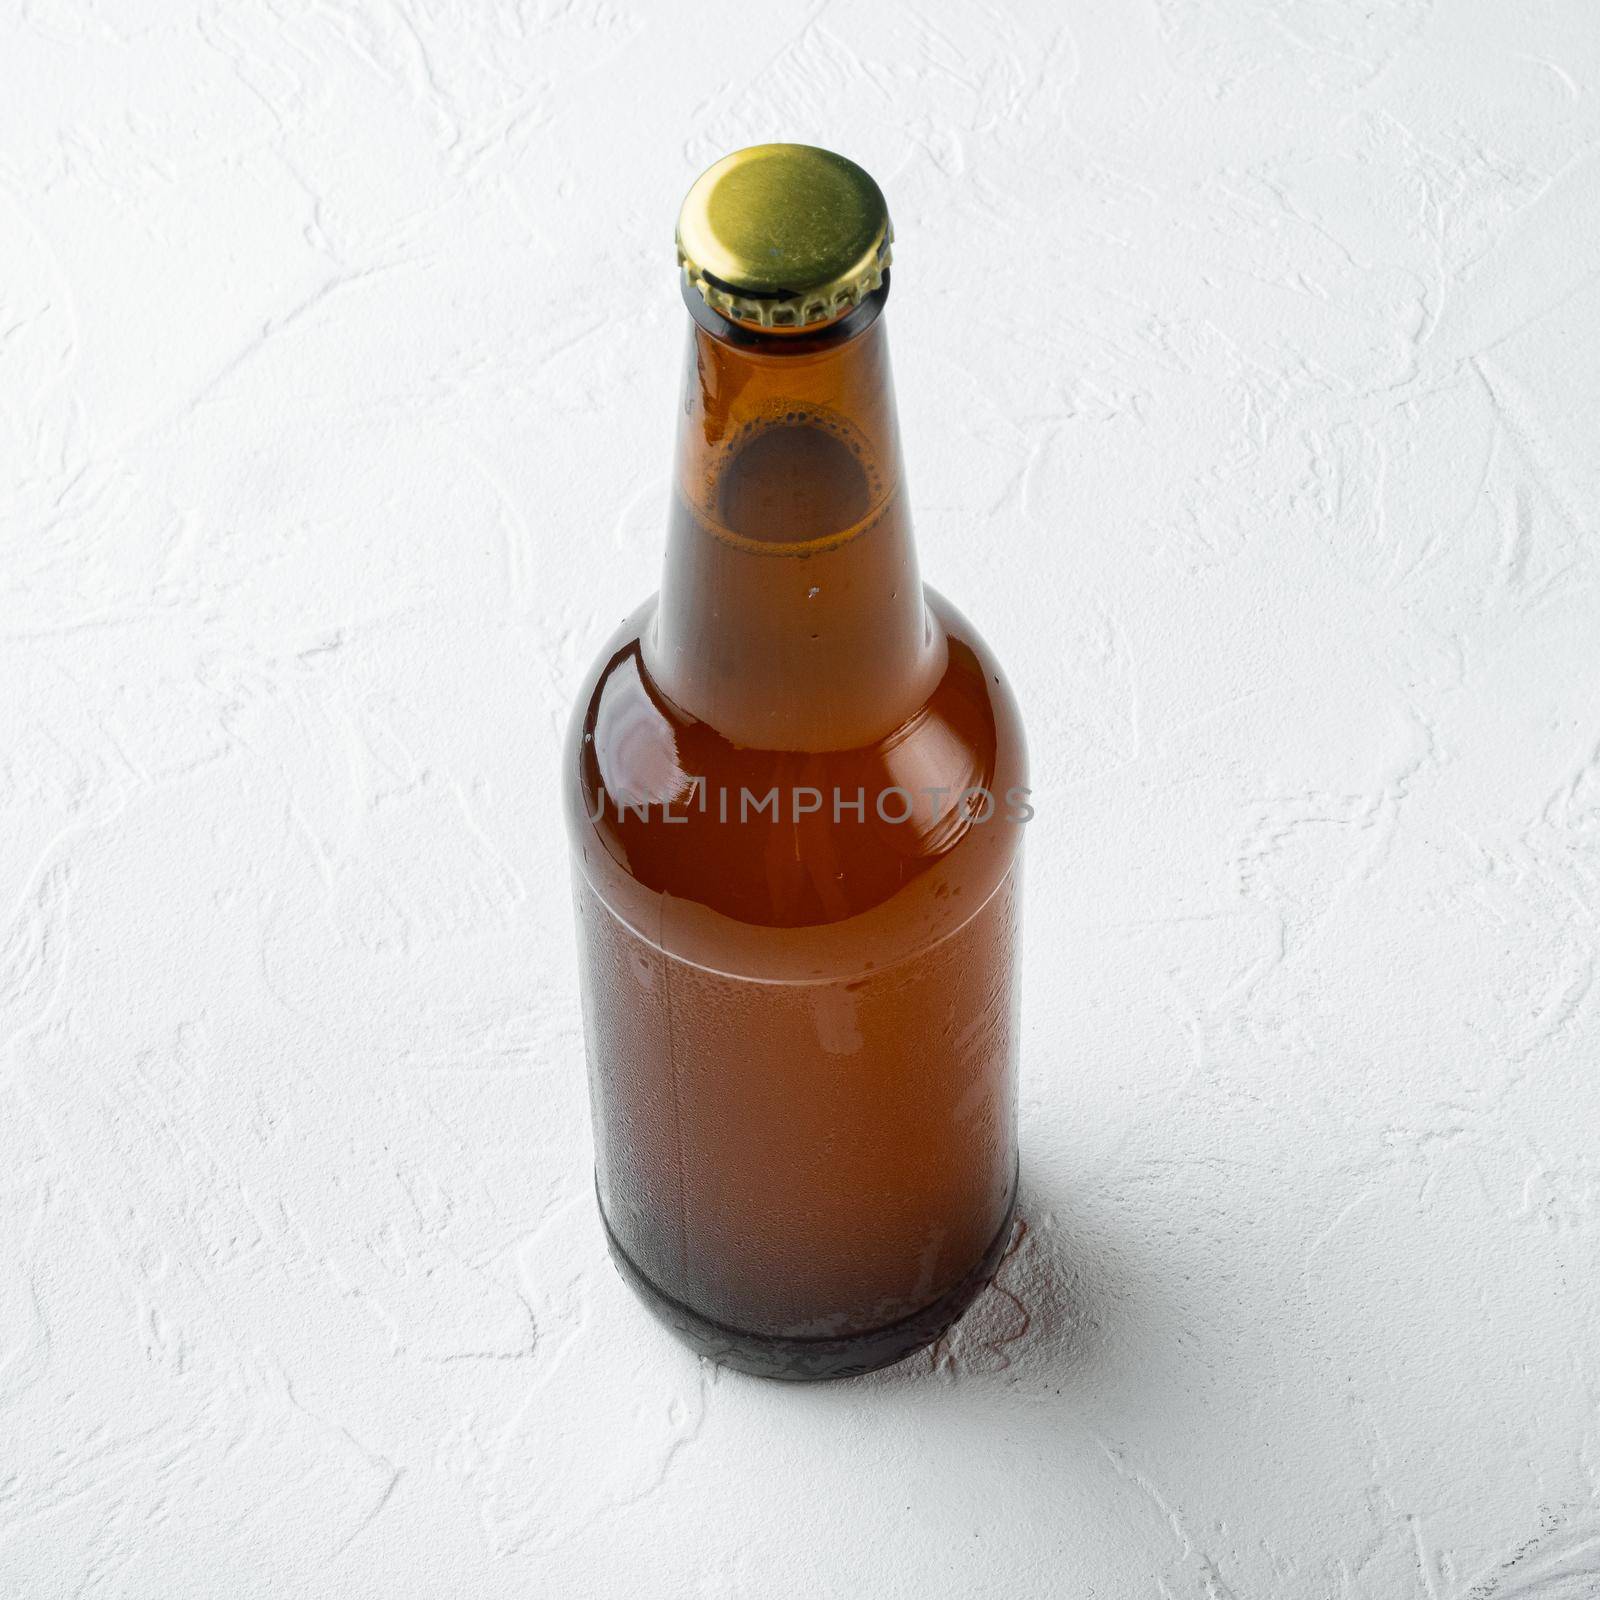 Glass bottles of beer, on white stone surface, square format by Ilianesolenyi